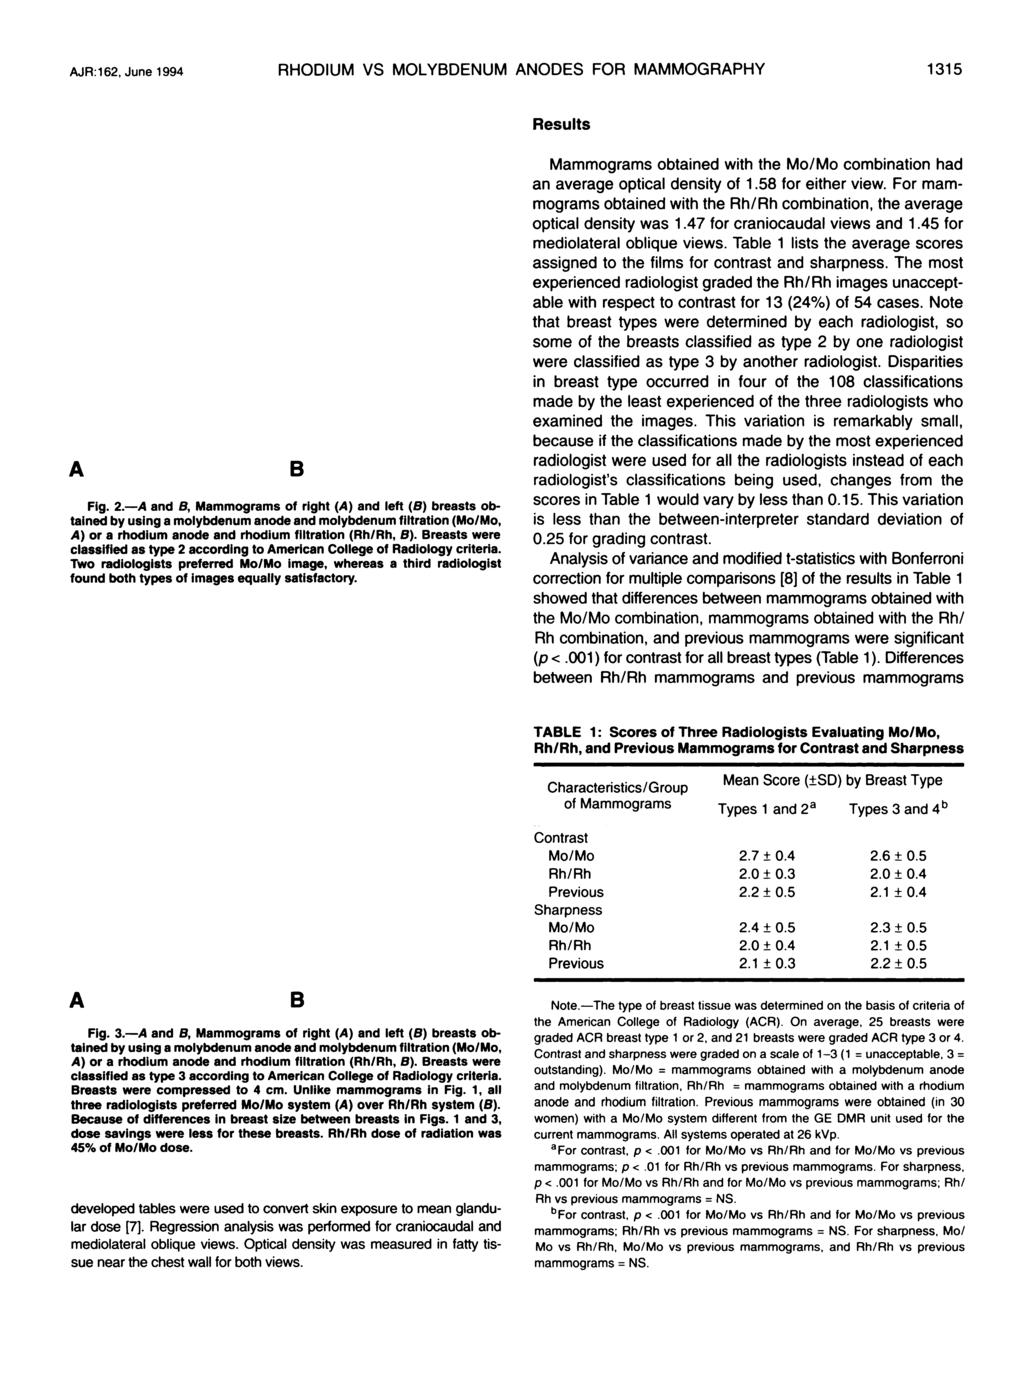 AJR:162, June 1994 RHODIUM VS MOLYBDENUM ANODES FOR MAMMOGRAPHY 1315 Results Fig. 2.